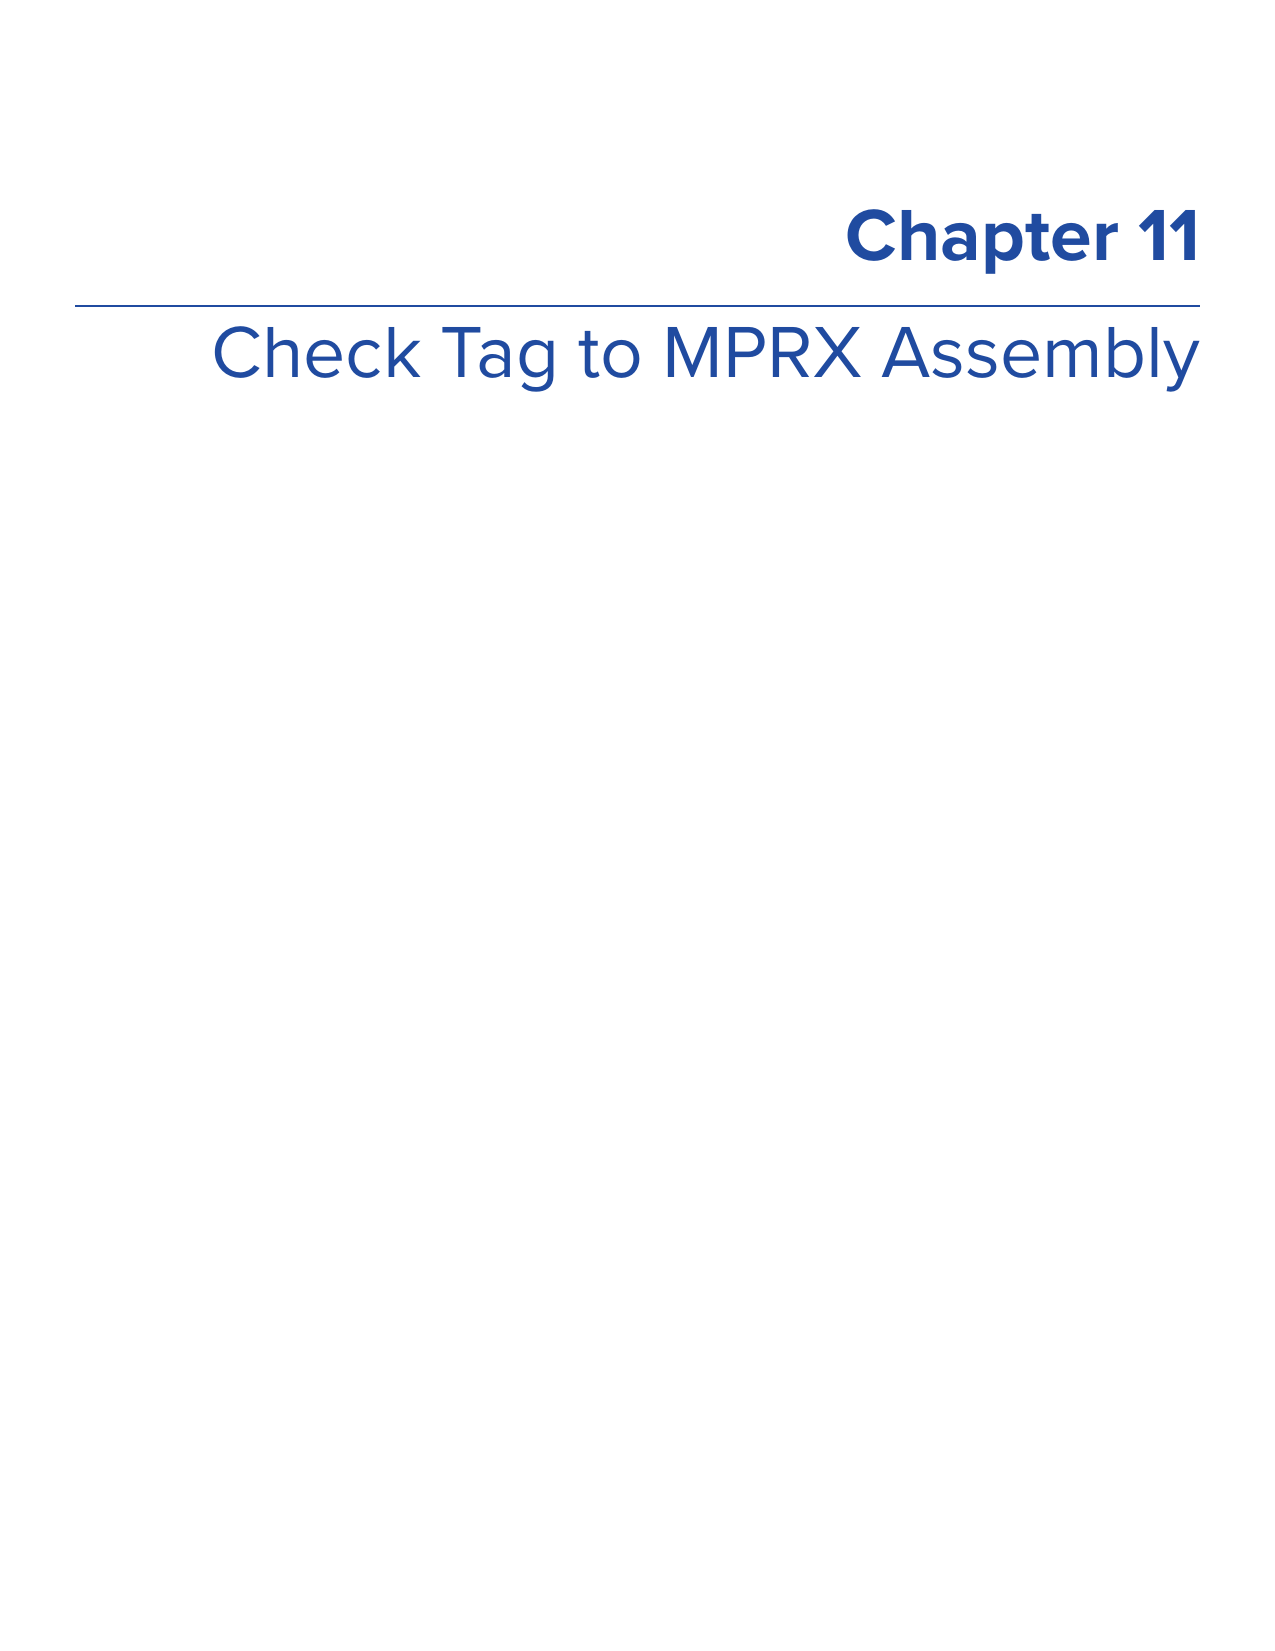 Chapter 11Check Tag to MPRX Assembly